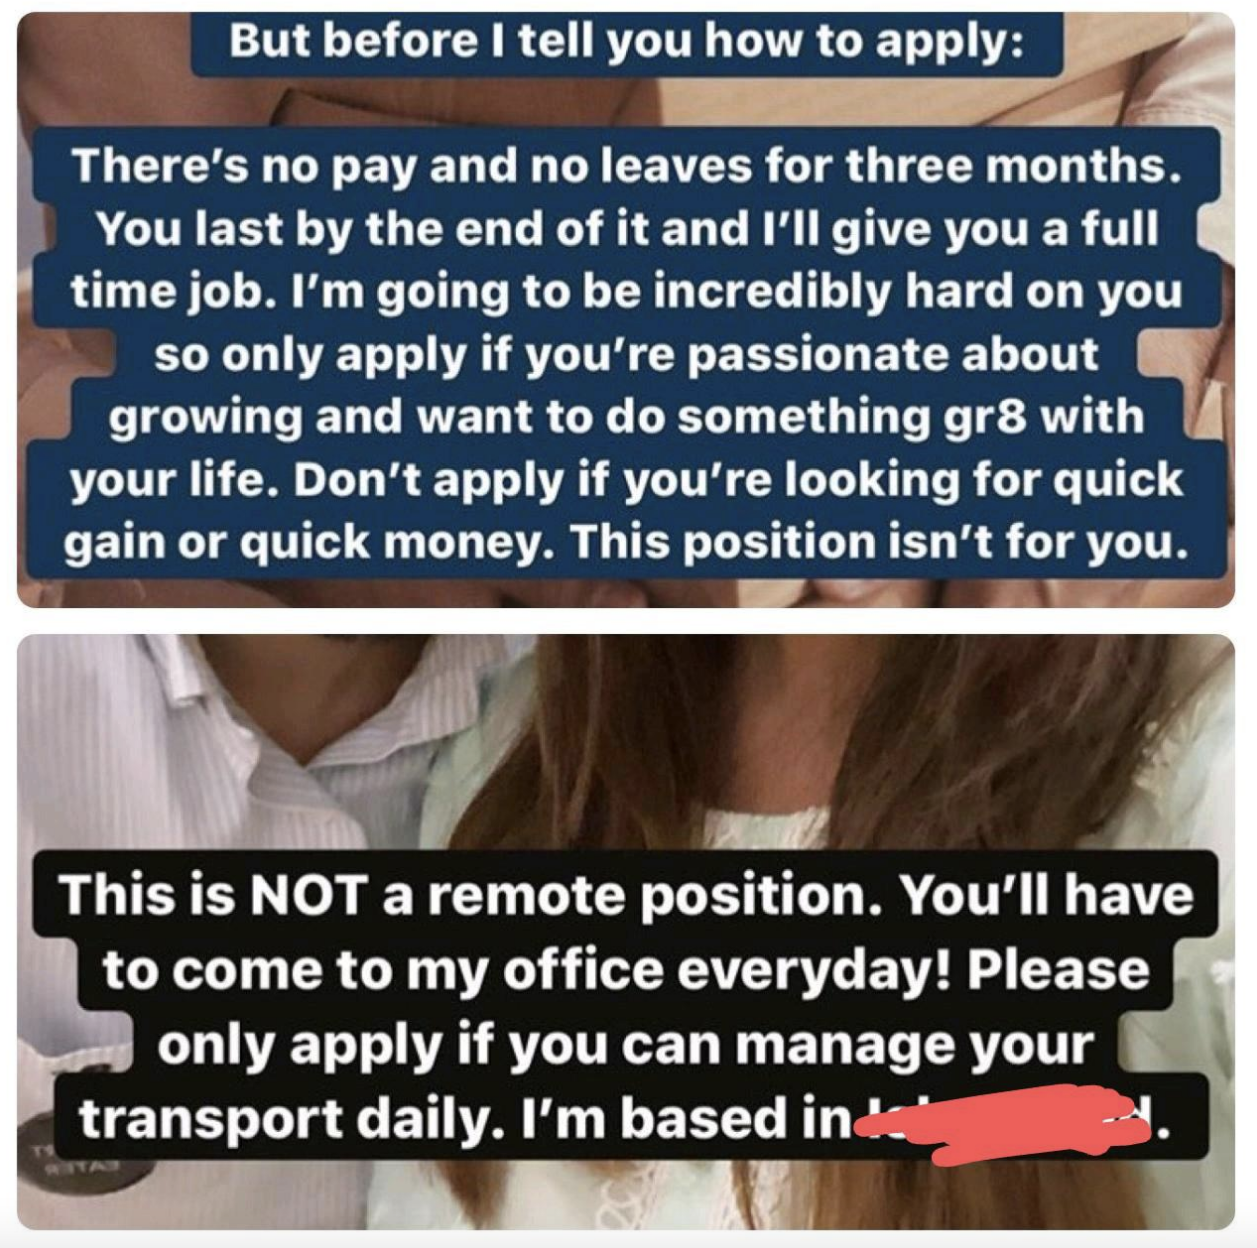 &quot;Please only apply if you can manage your transport daily.&quot;